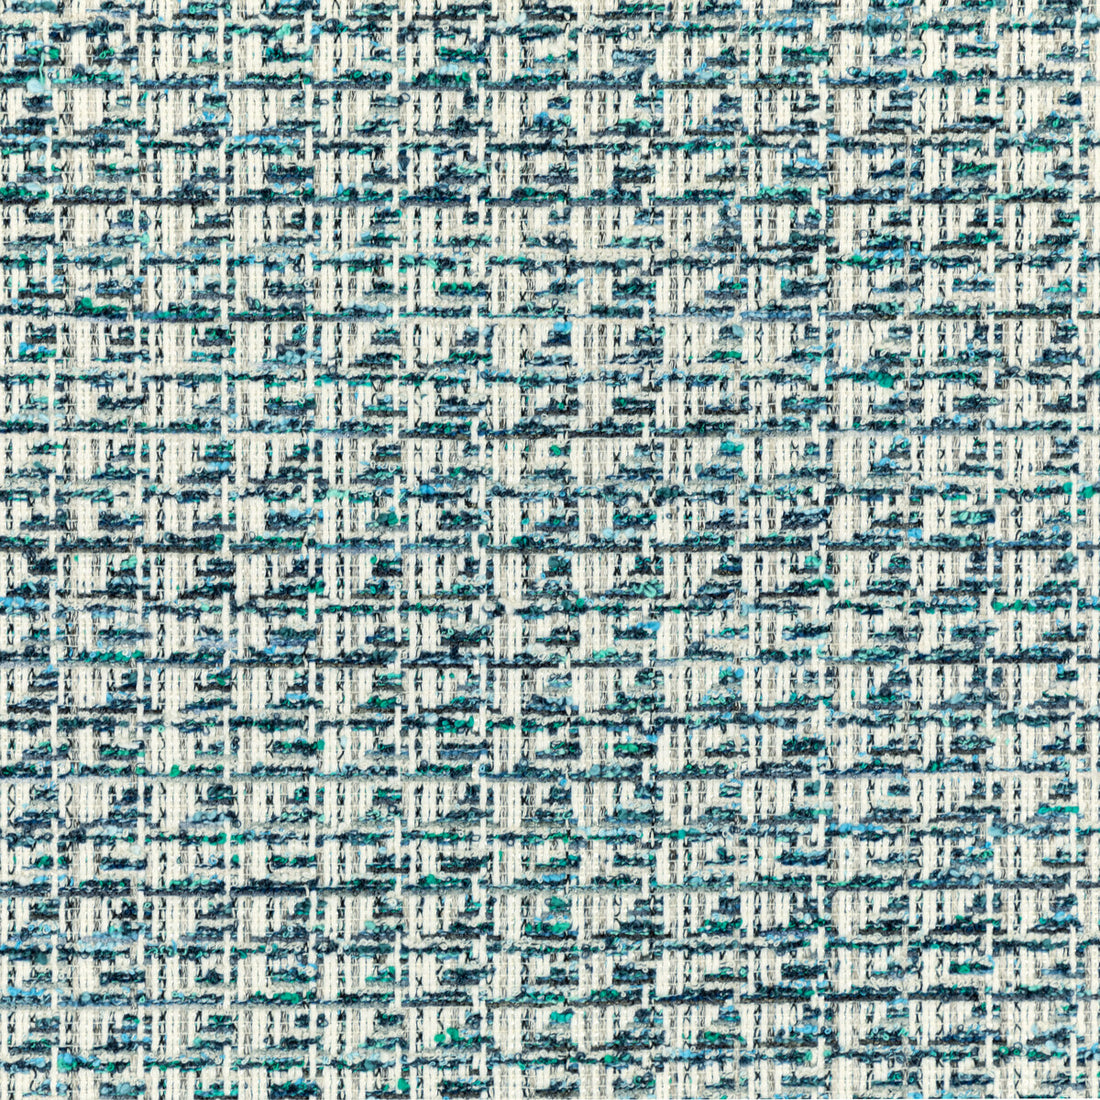 Tweed Jacket fabric in peacock color - pattern 34909.355.0 - by Kravet Couture in the Luxury Textures II collection